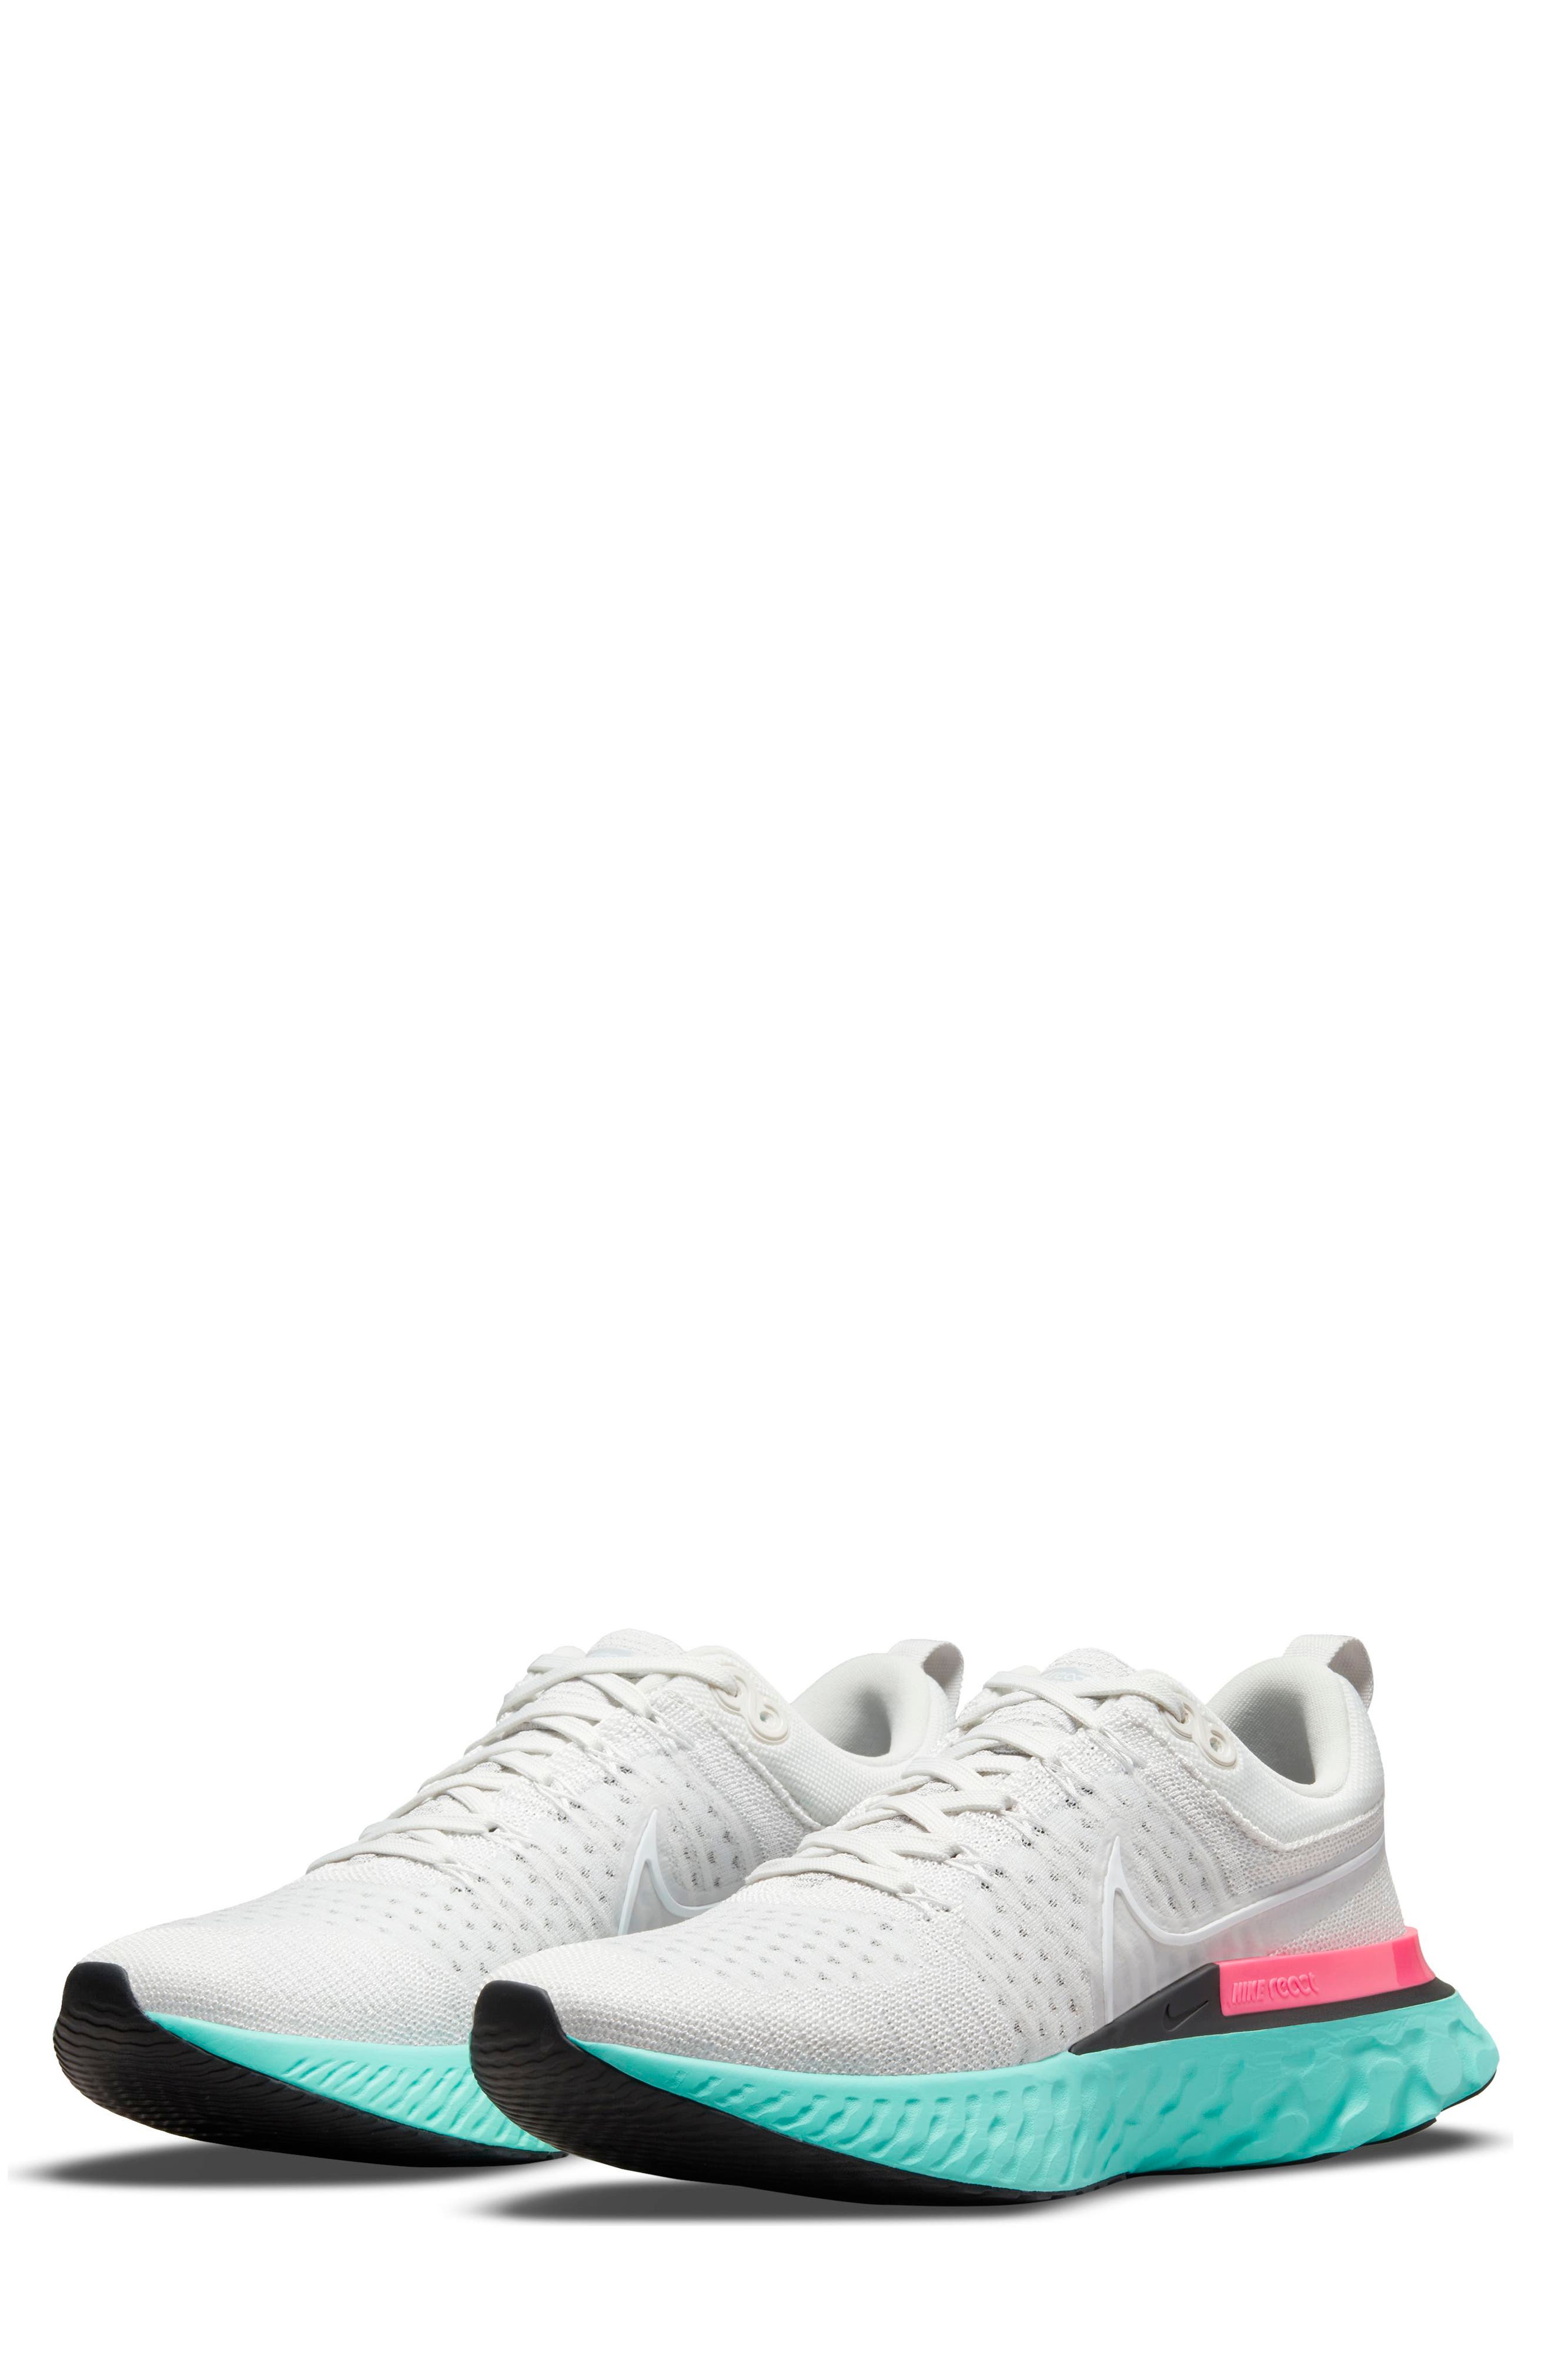 UPC 195237000340 product image for NIKE React Infinity Run Flyknit 2 Running Shoe in Platinum Tint/White at Nordstr | upcitemdb.com